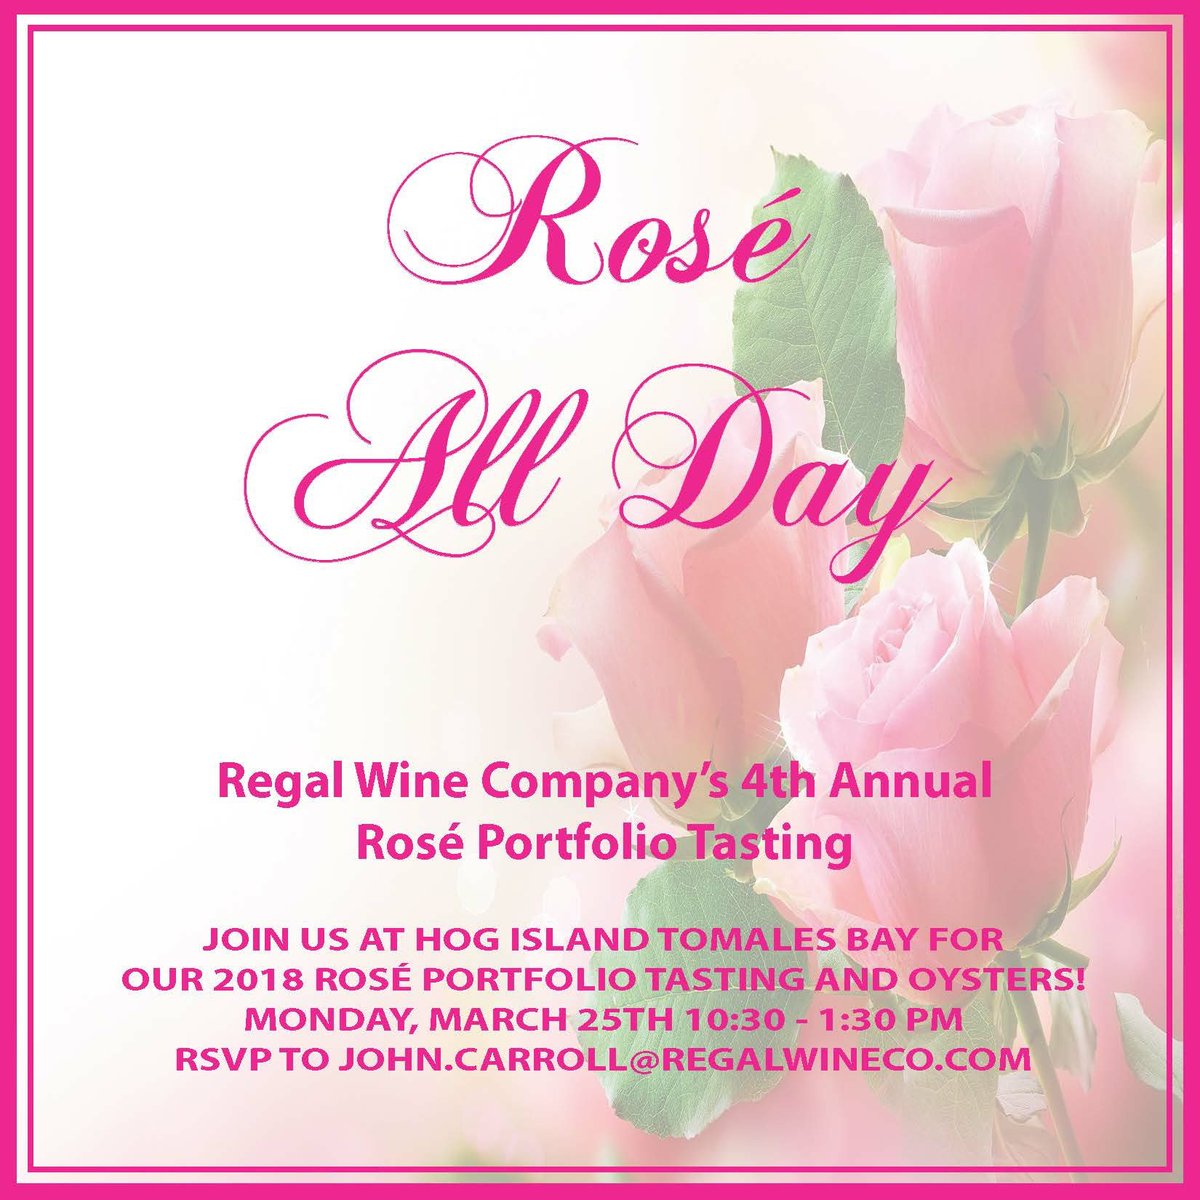 ✨🎉It's here! Regal Wine Company's 4th Annual Rosé Portfolio Tasting!🎉✨

Join us at Hog Island Tomales Bay for our 2018 Rosé Portfolio Tasting and Oysters! 

🍷Monday, March 25th from 10:30am-1:30pm
🍷RSVP to John Carroll at John.Carroll@regalwineco.com